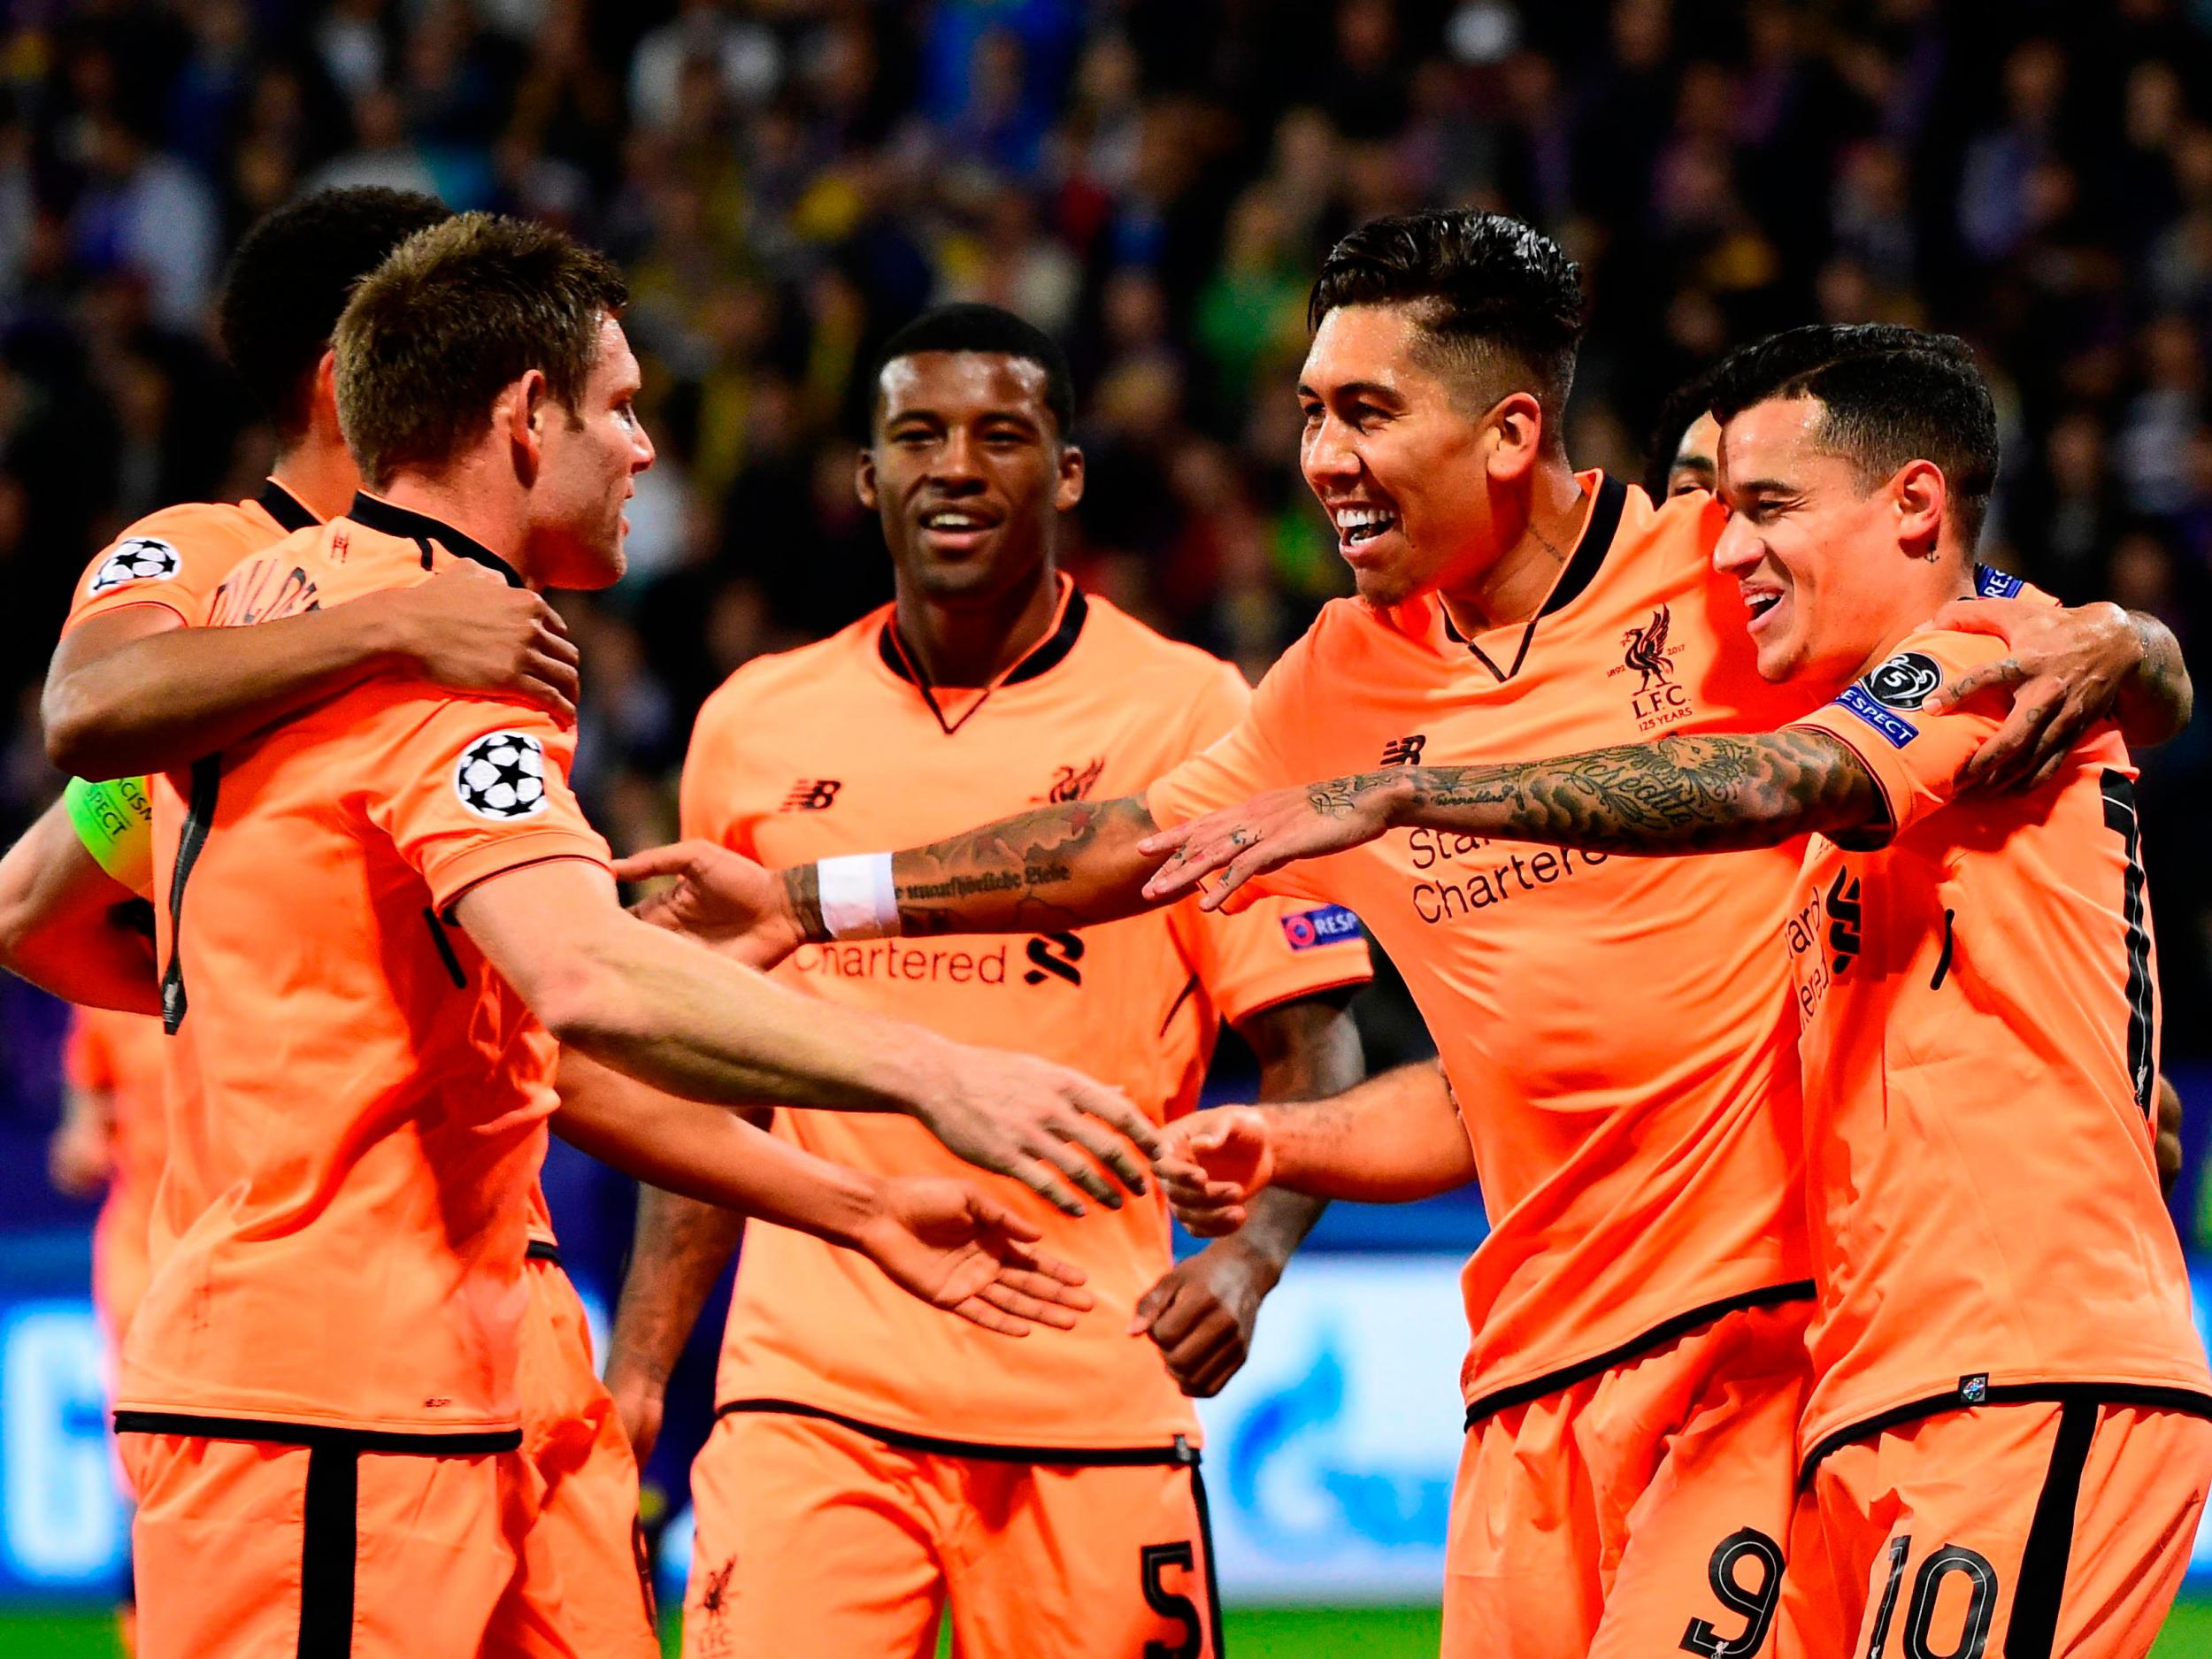 Liverpool were at their brilliant best against a limited Maribor outfit